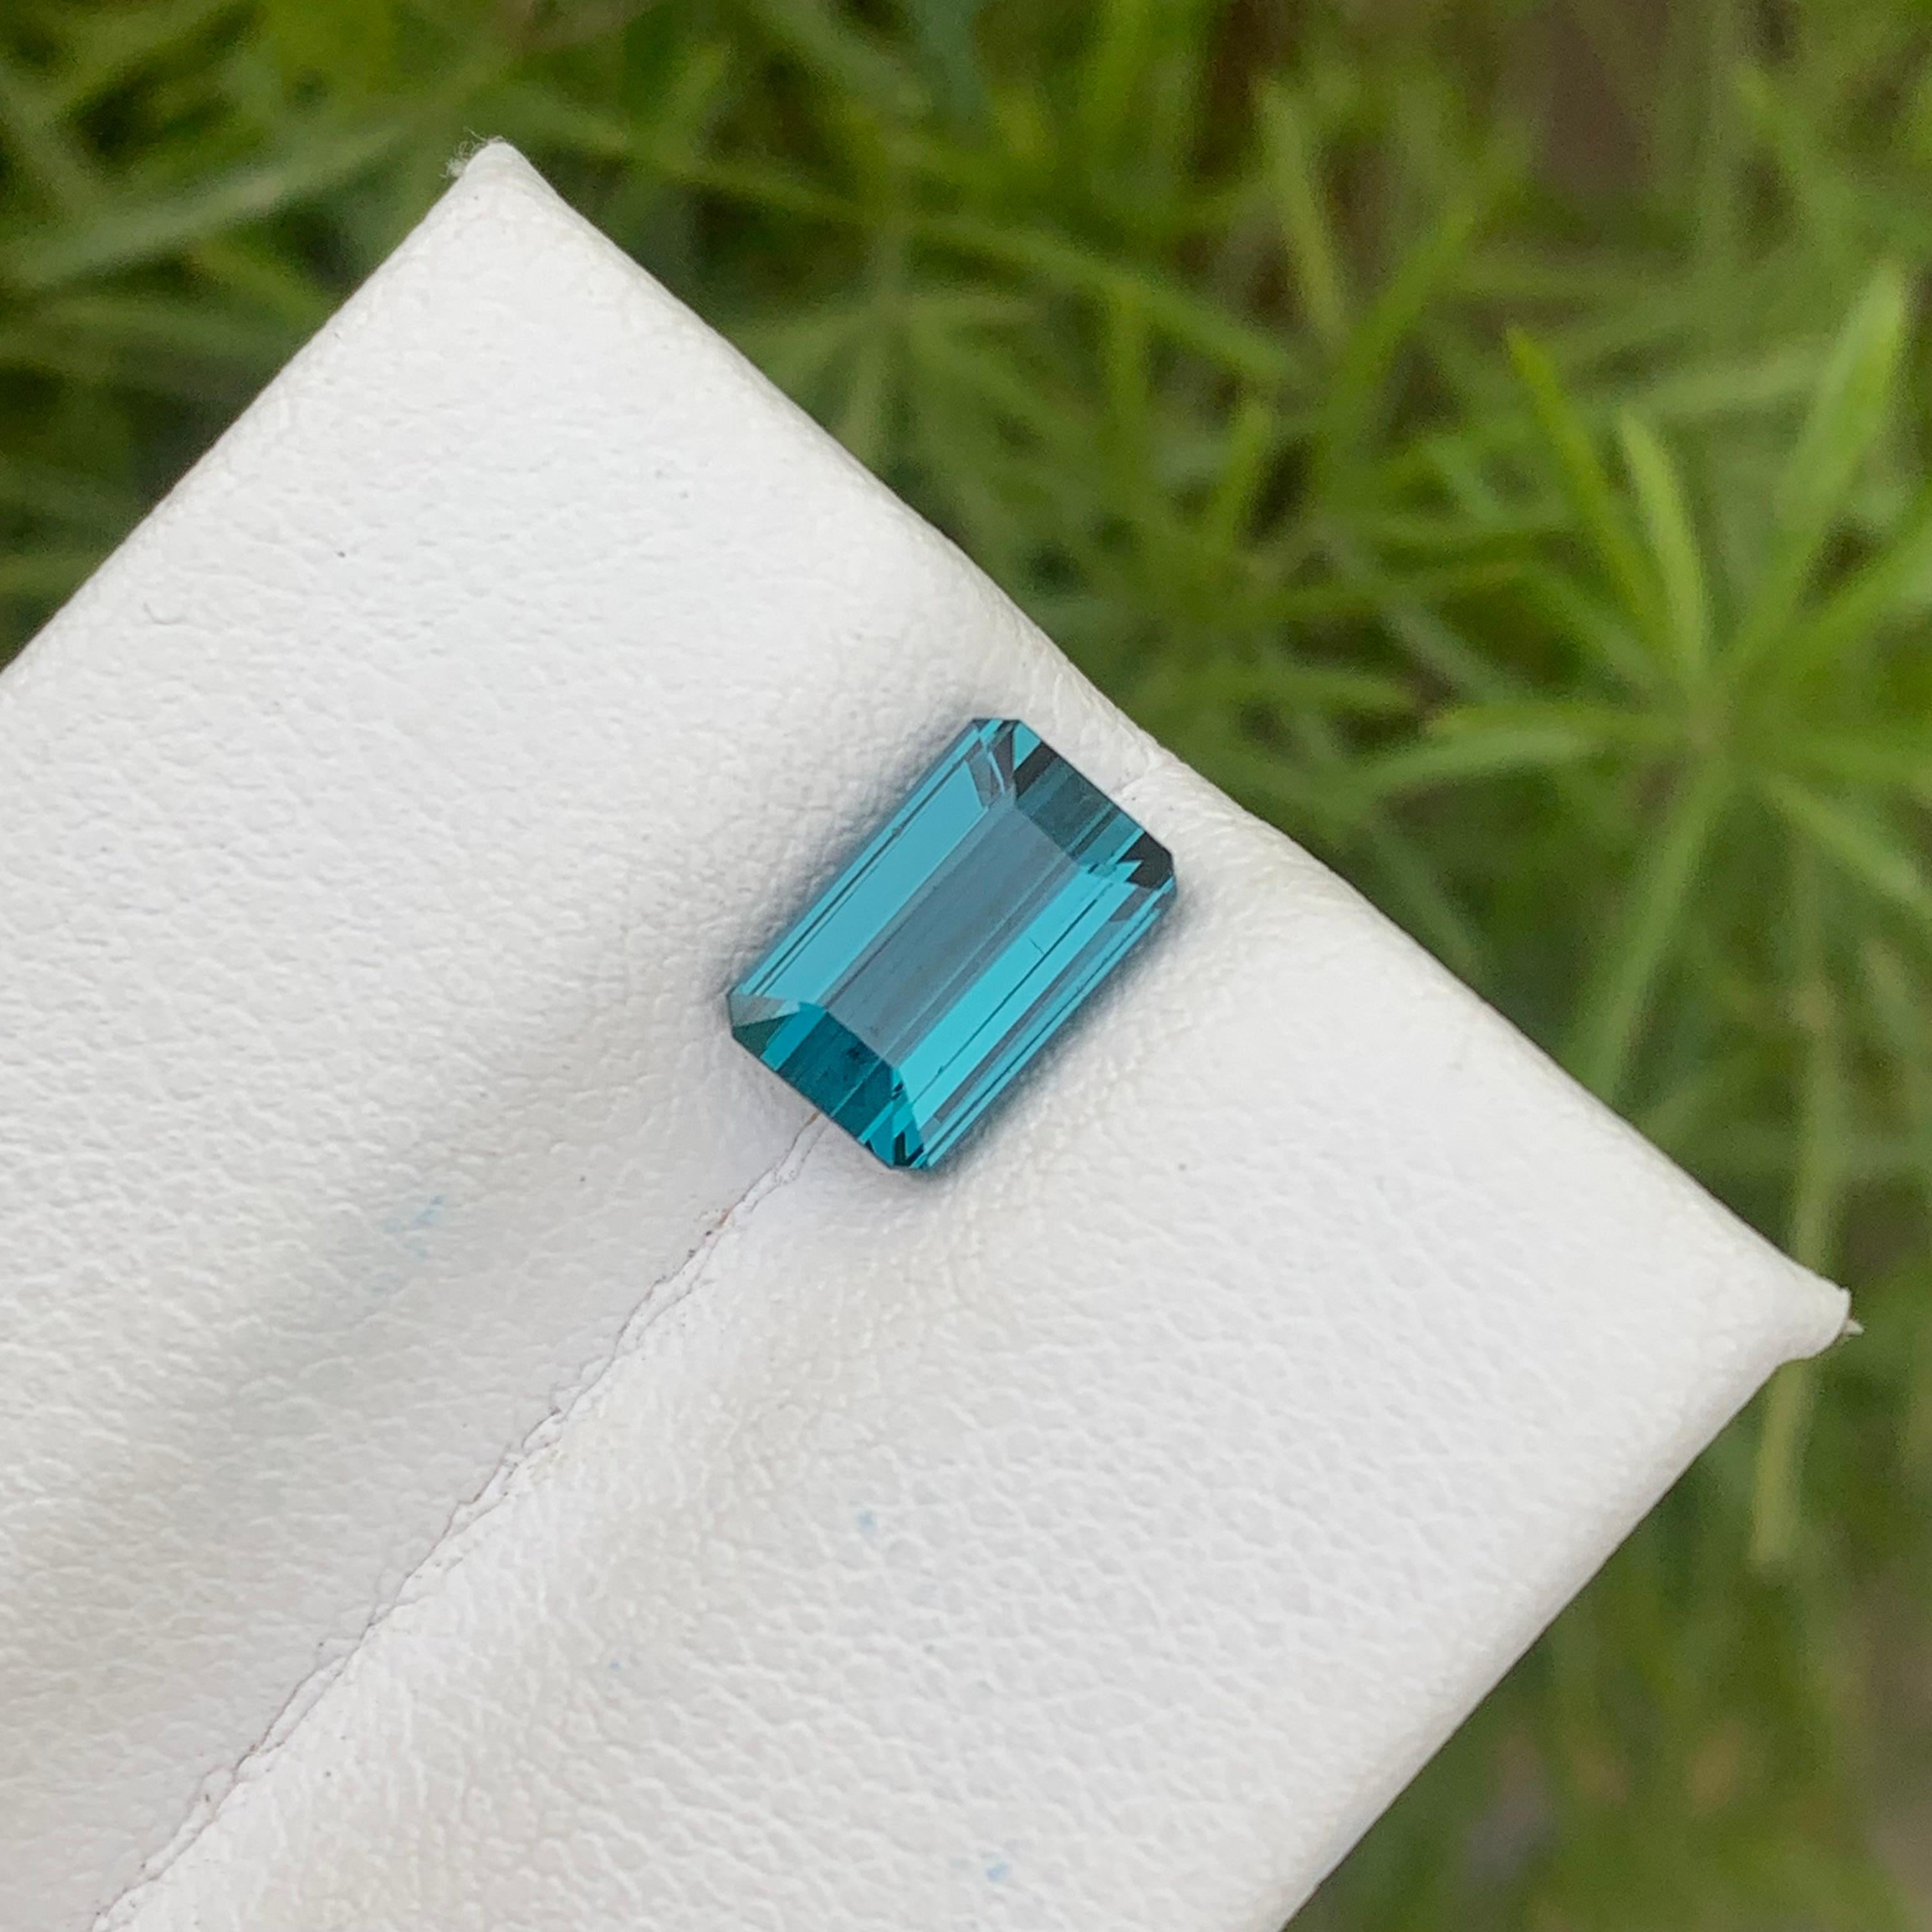 Emerald Cut Incredible Natural Loose Indicolite Tourmaline 1.50 Carat from Afghanistan Mine For Sale